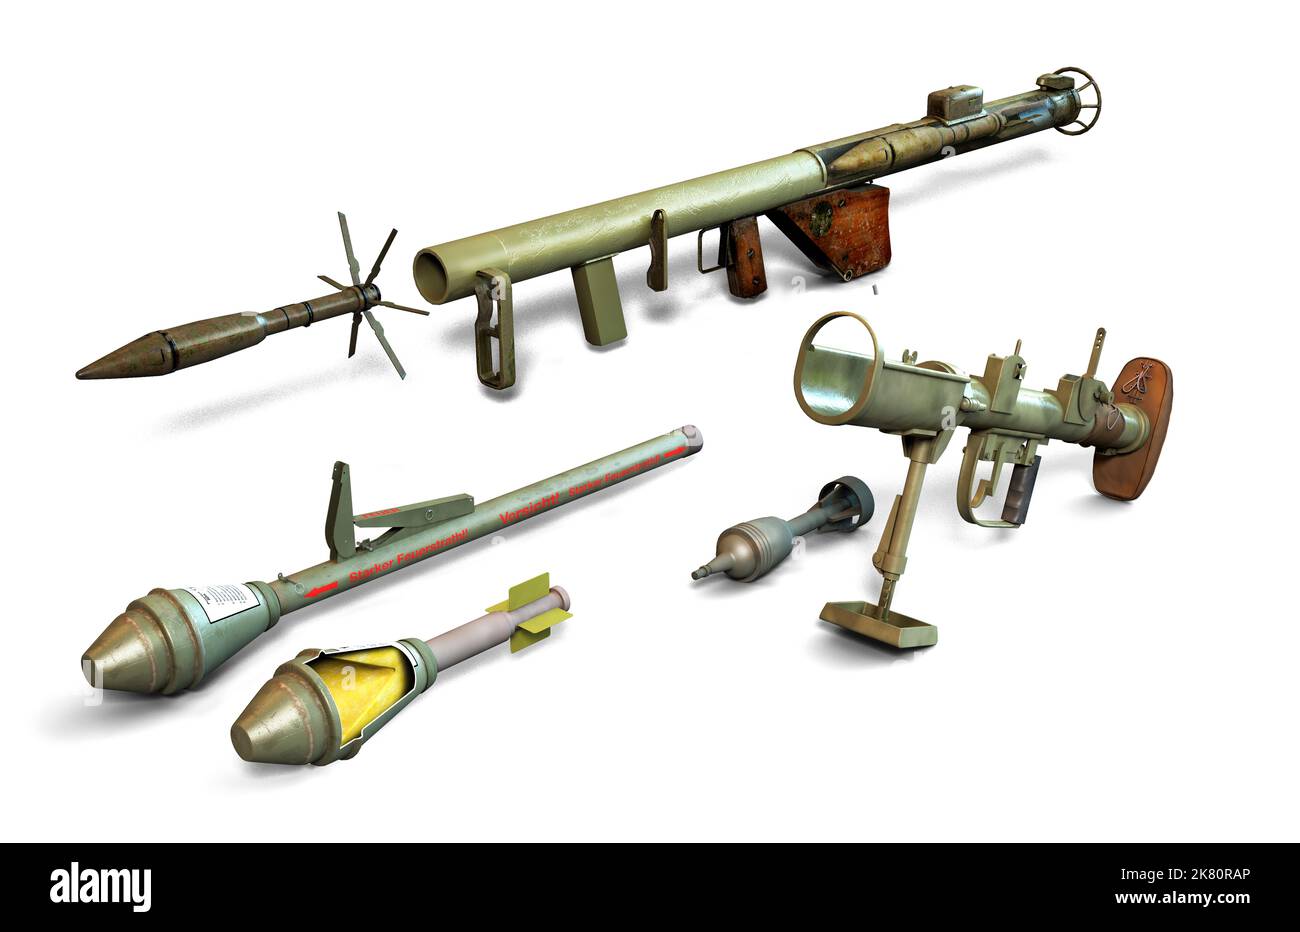 Illustration of the American Bazooka, the German Panzerfaust and the British PIAT. Stock Photo